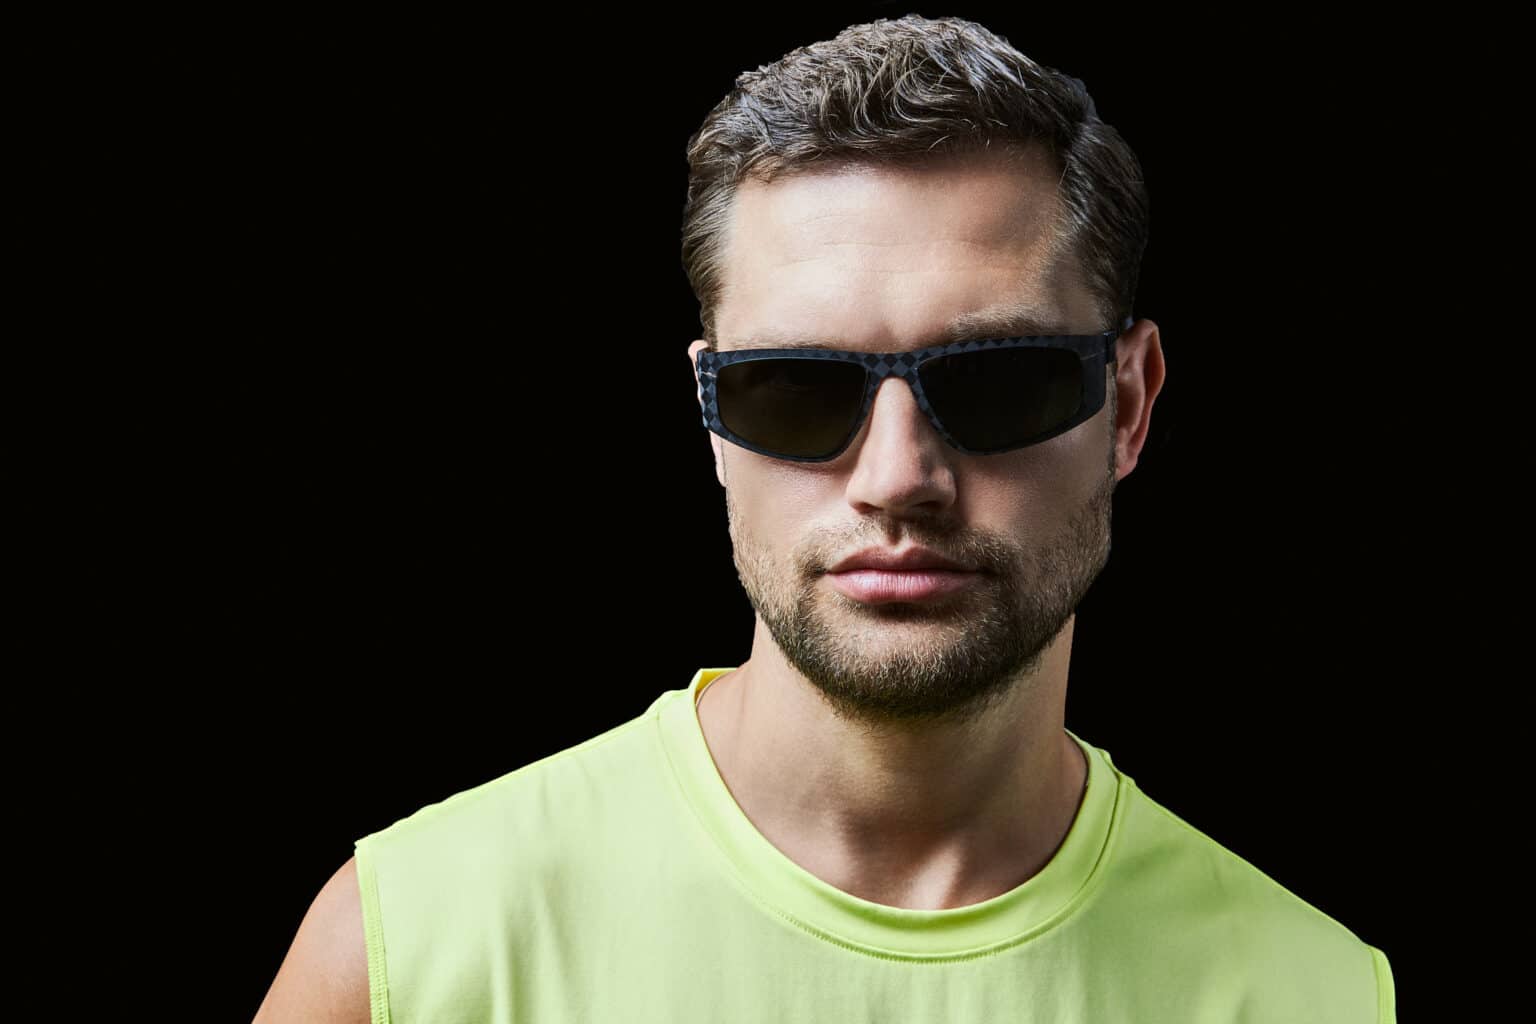 Stylish and modern ic! berlin Flexarbon frame sports glasses that will be comfortable even during heavy physical activities